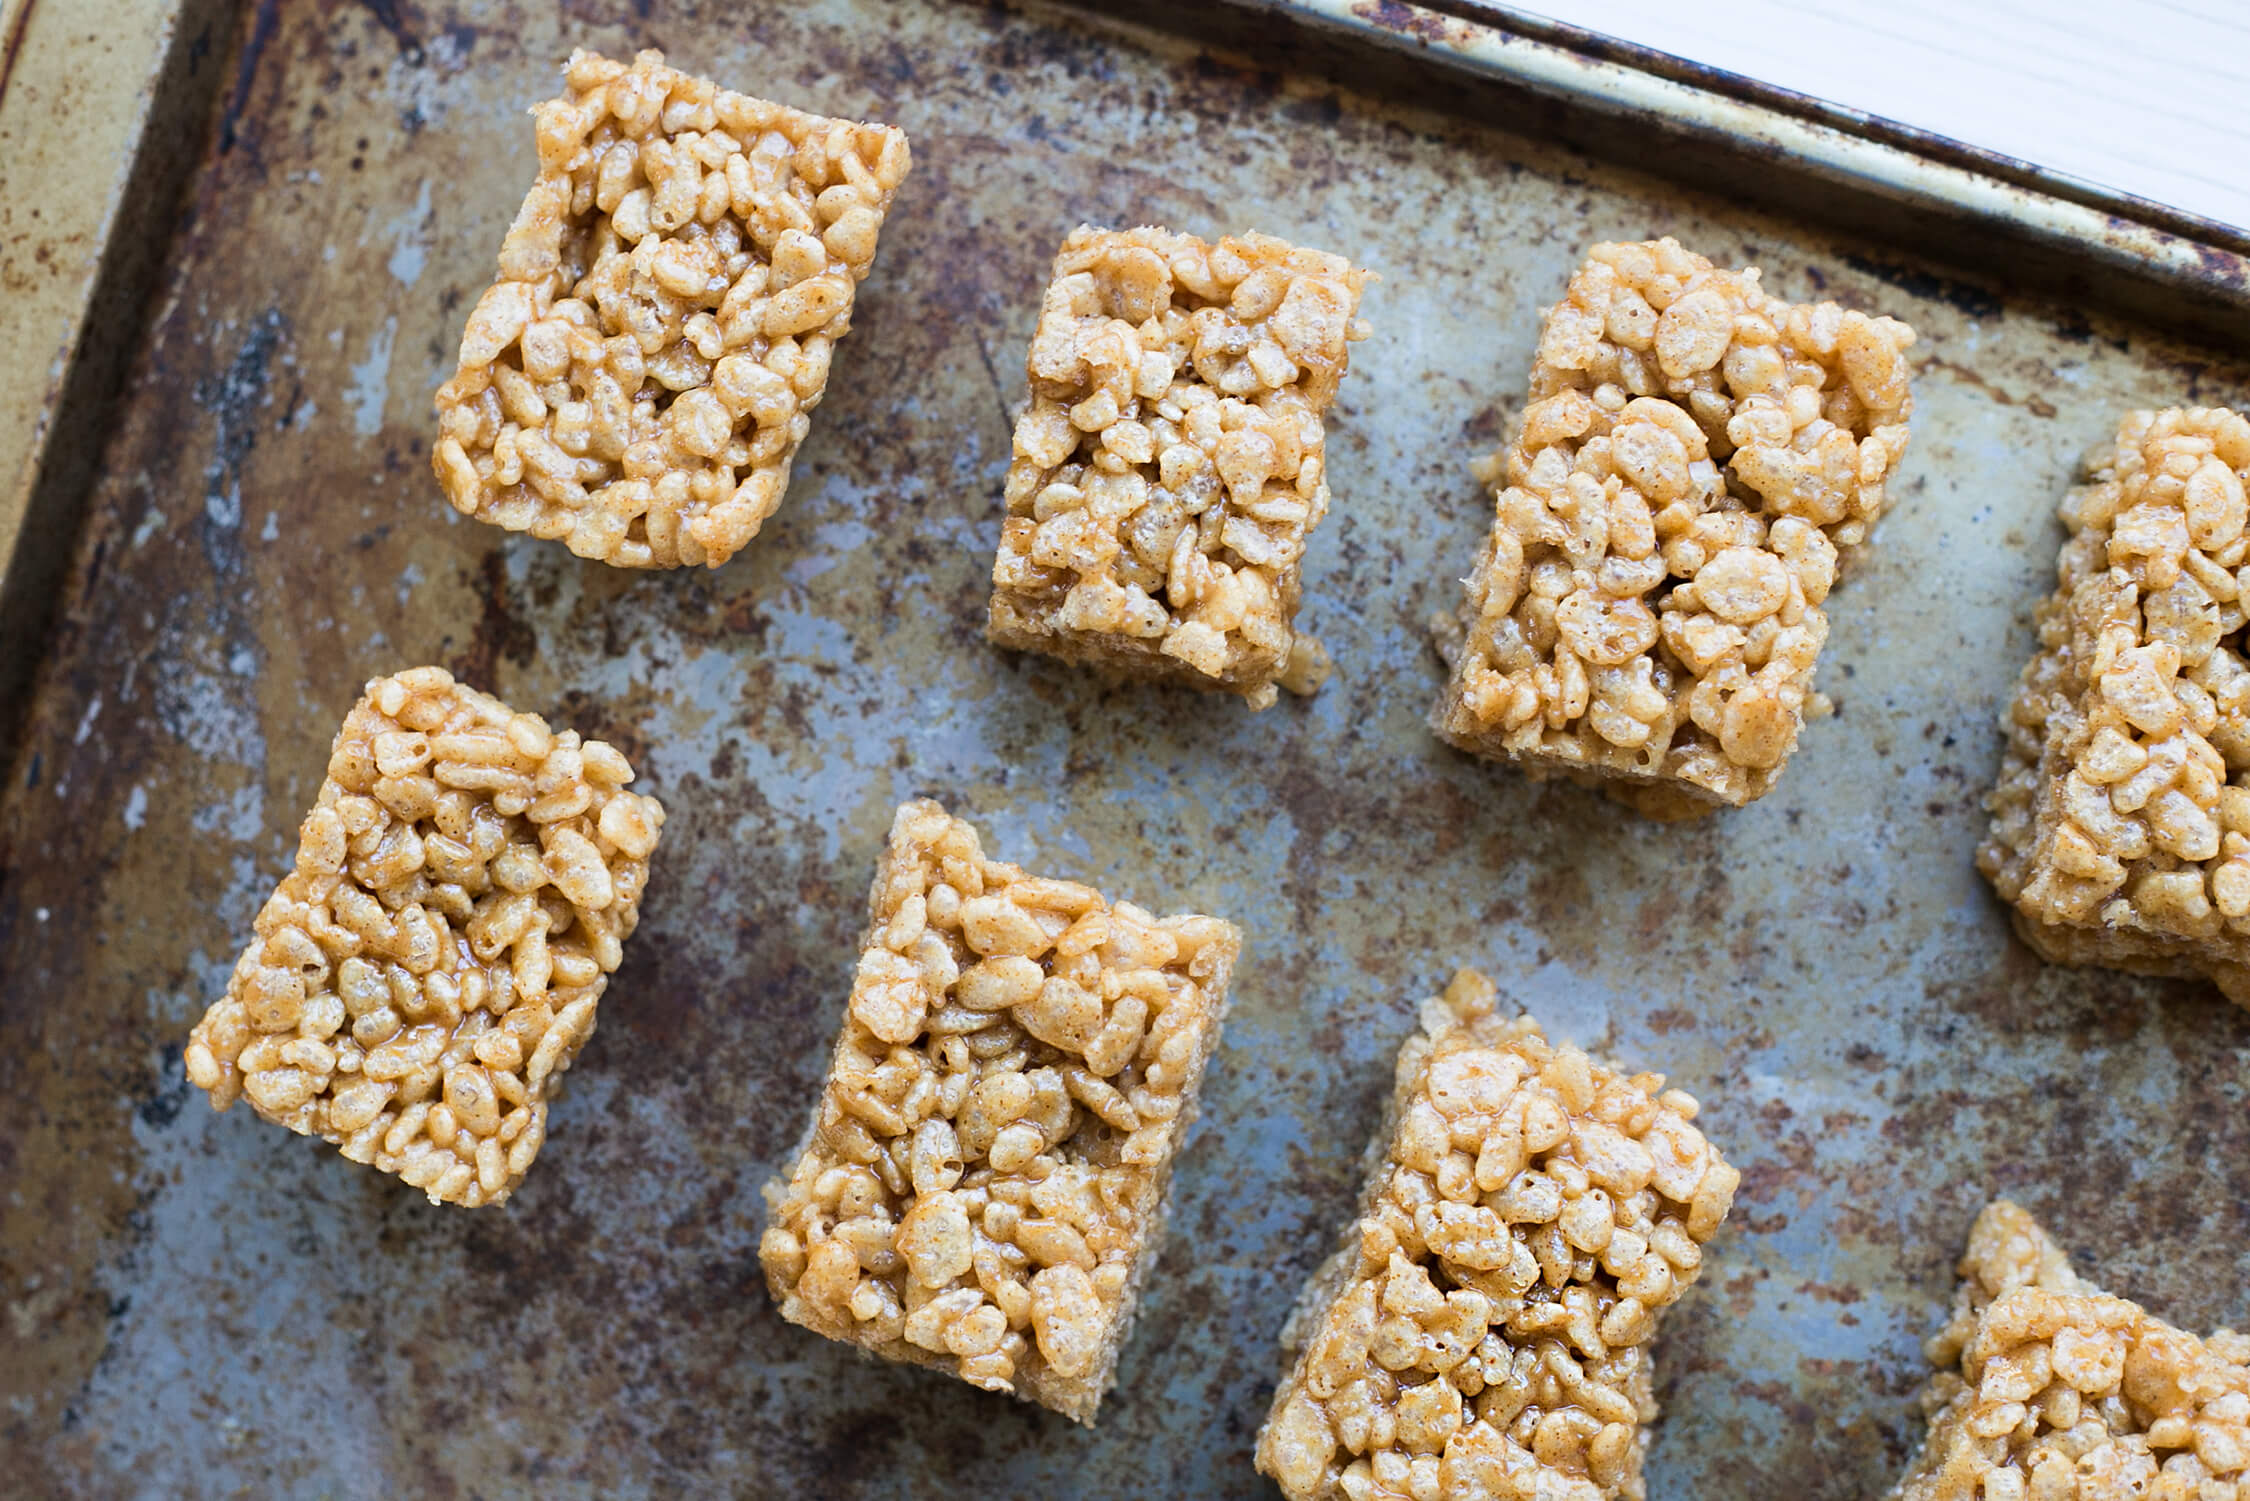 Healthy family-friendly snack: Peanut Butter Rice Krispies